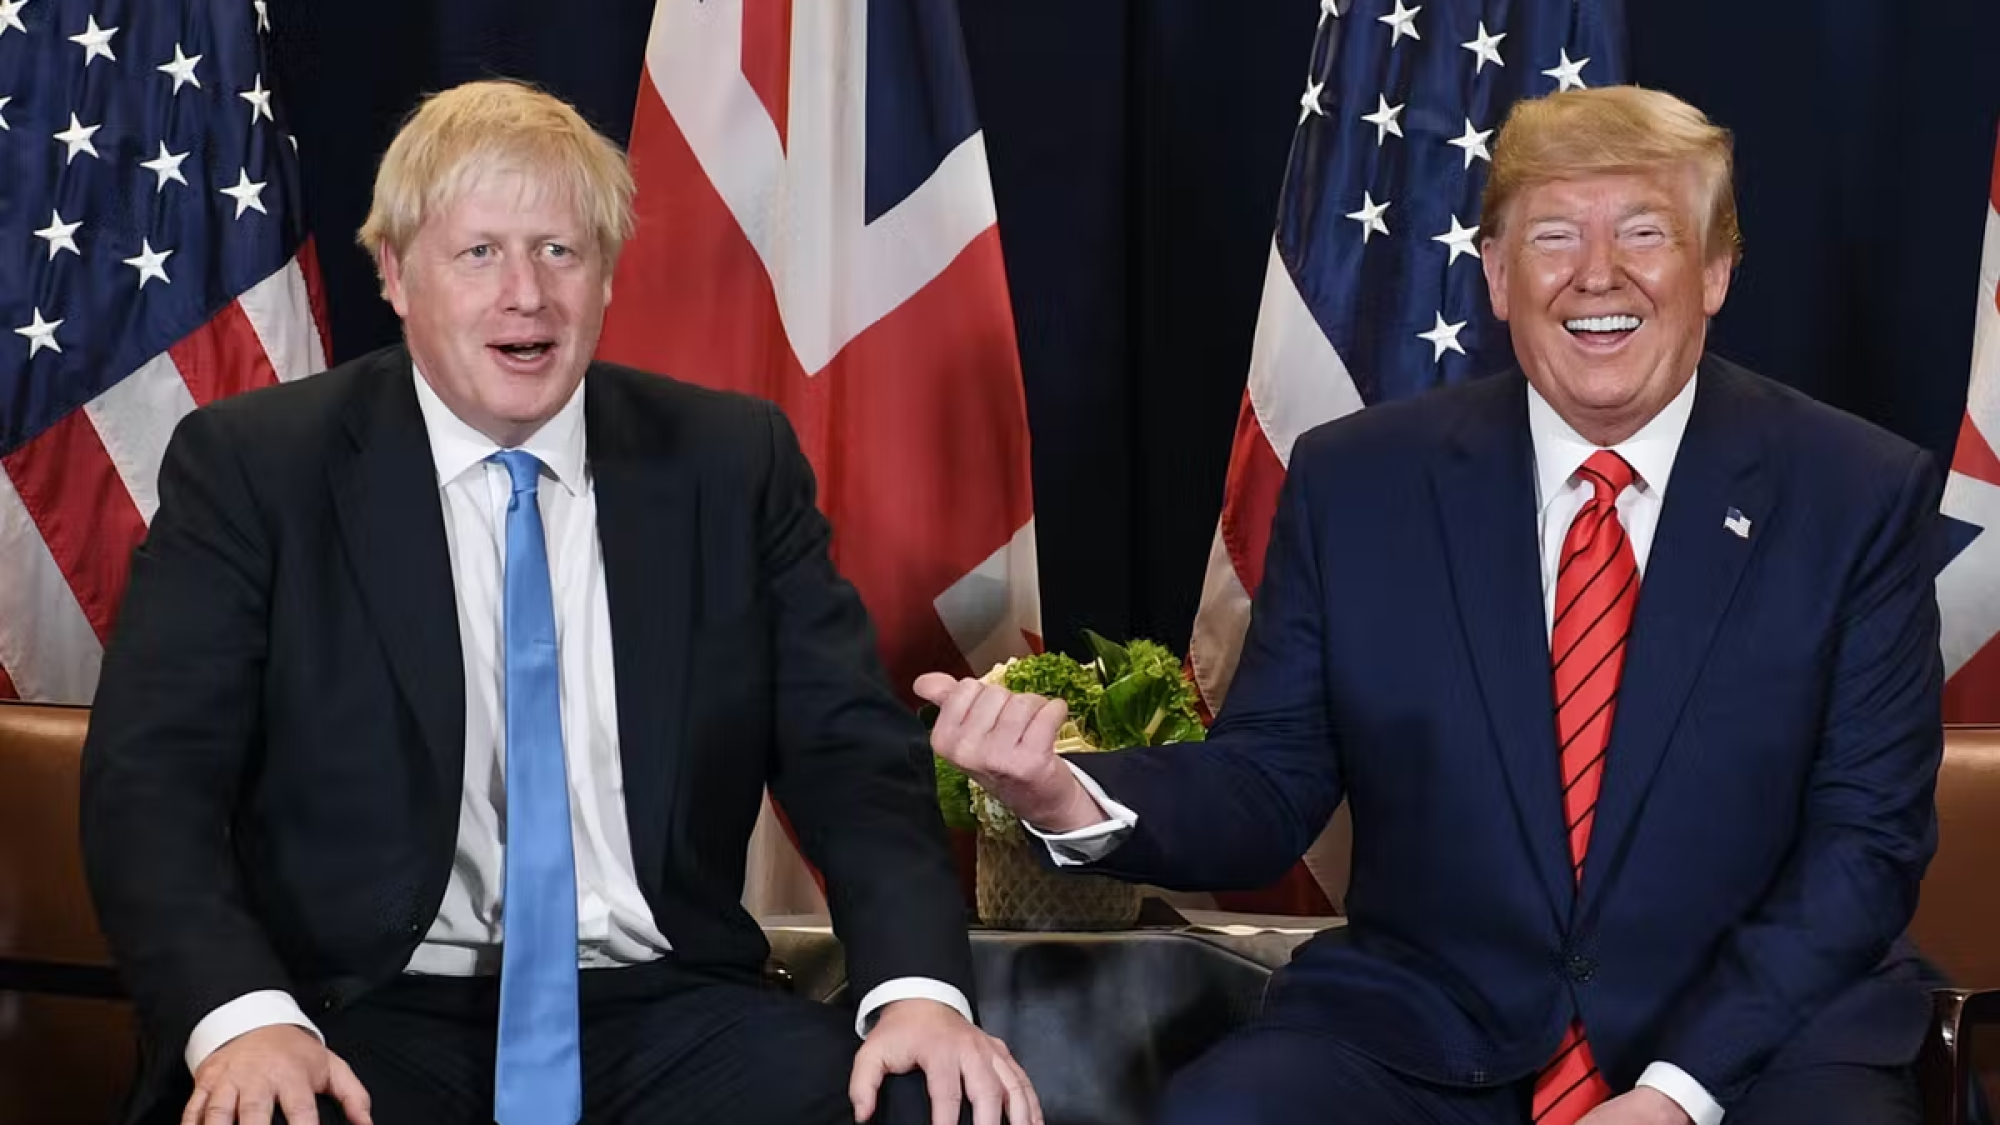 Boris Johnson seated next to Donald Trump, in front of UK and US flags.